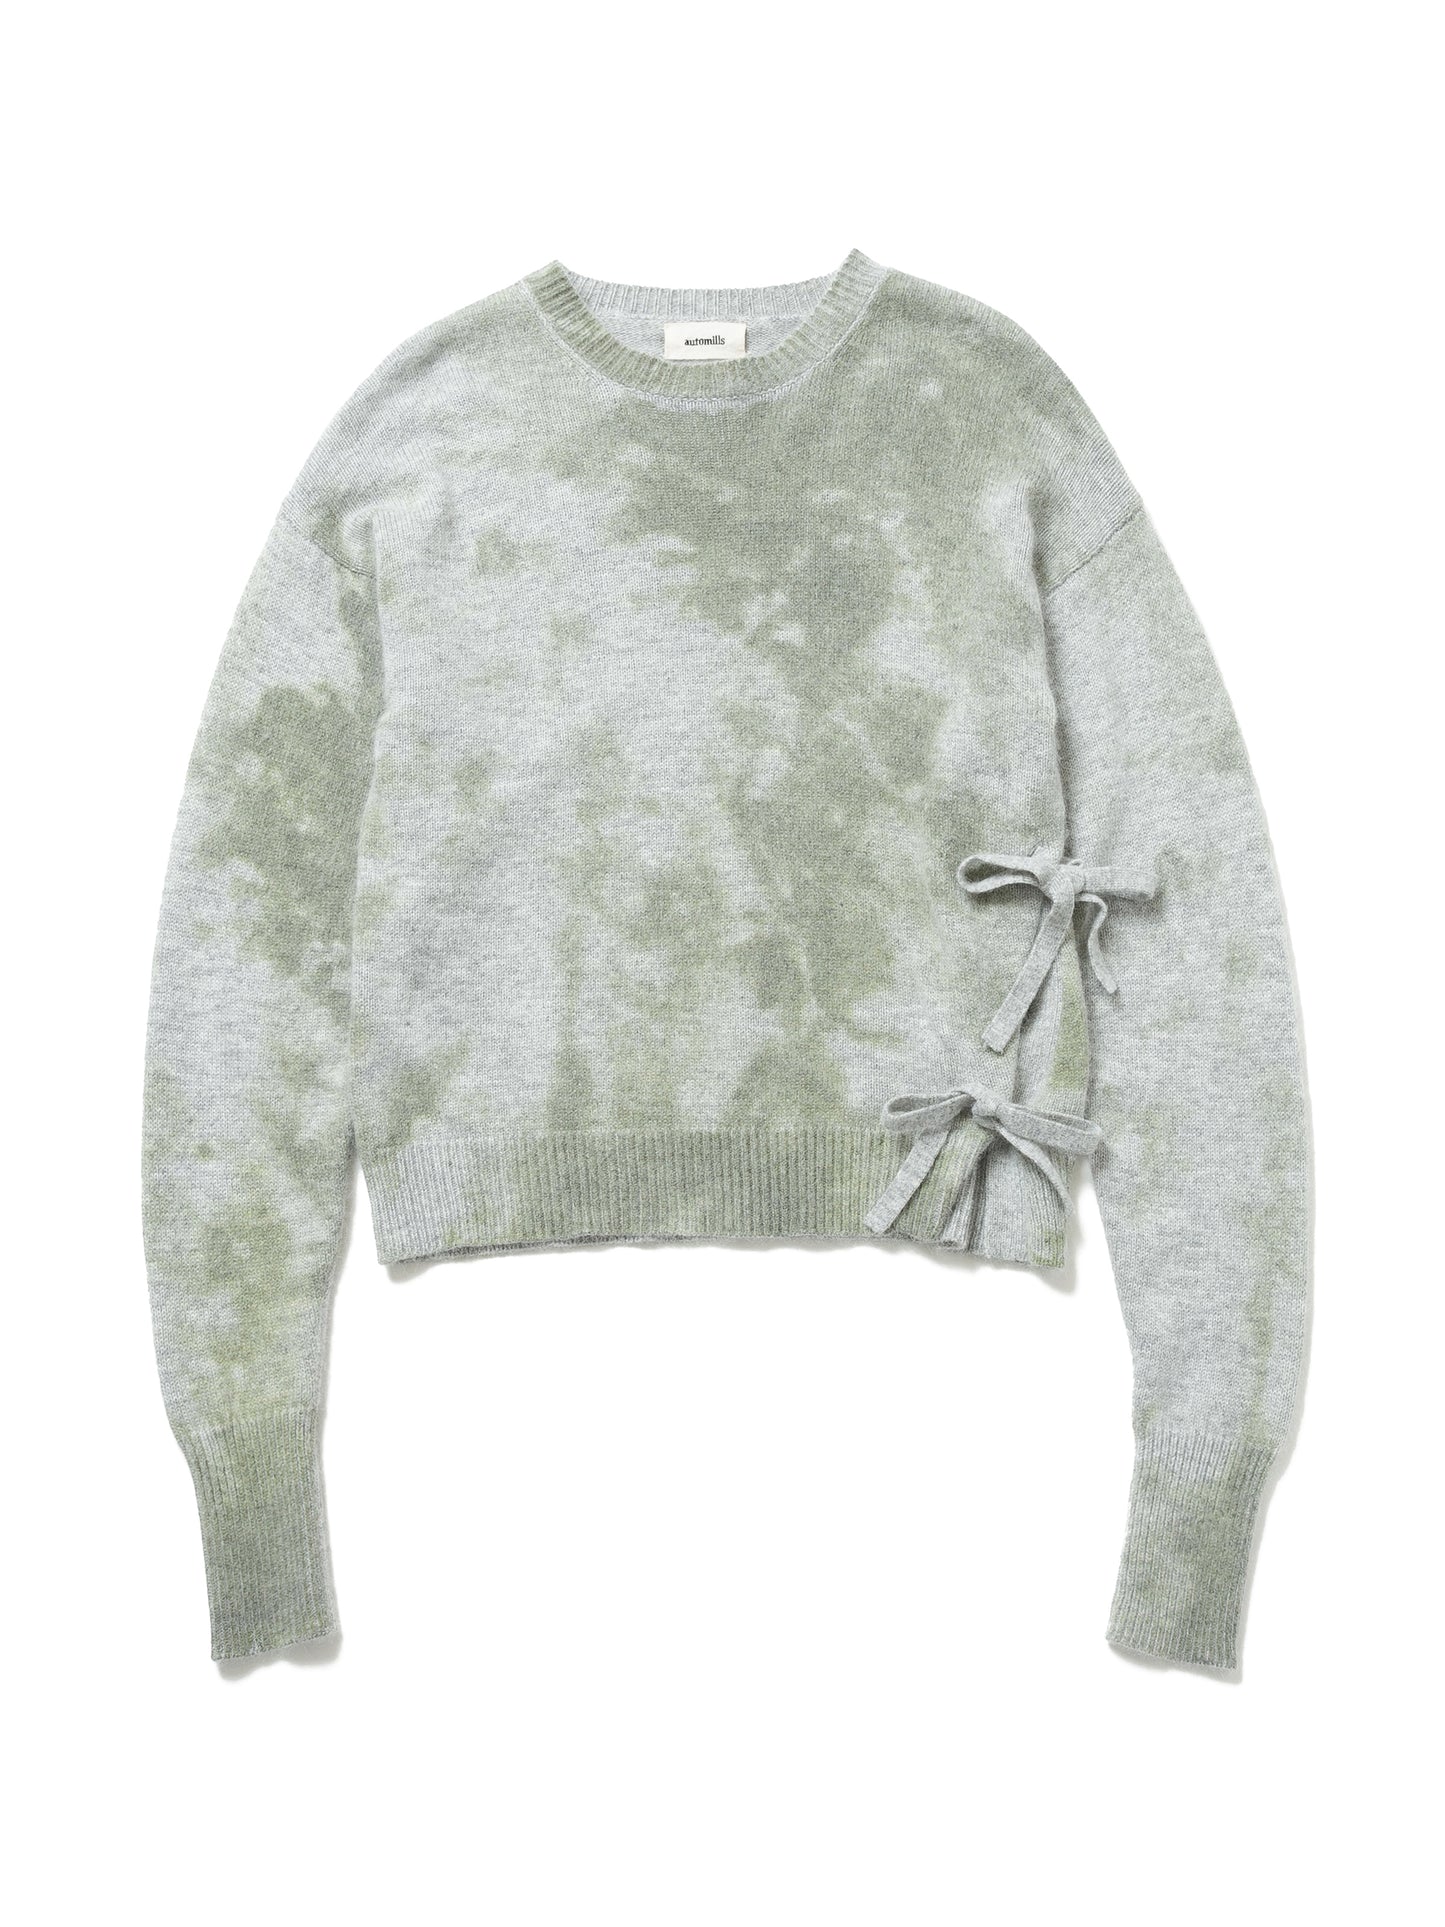 GRATEFUL SWEATER IMITATION TIE DYED PRINTED KNIT AM-K0105 Gray